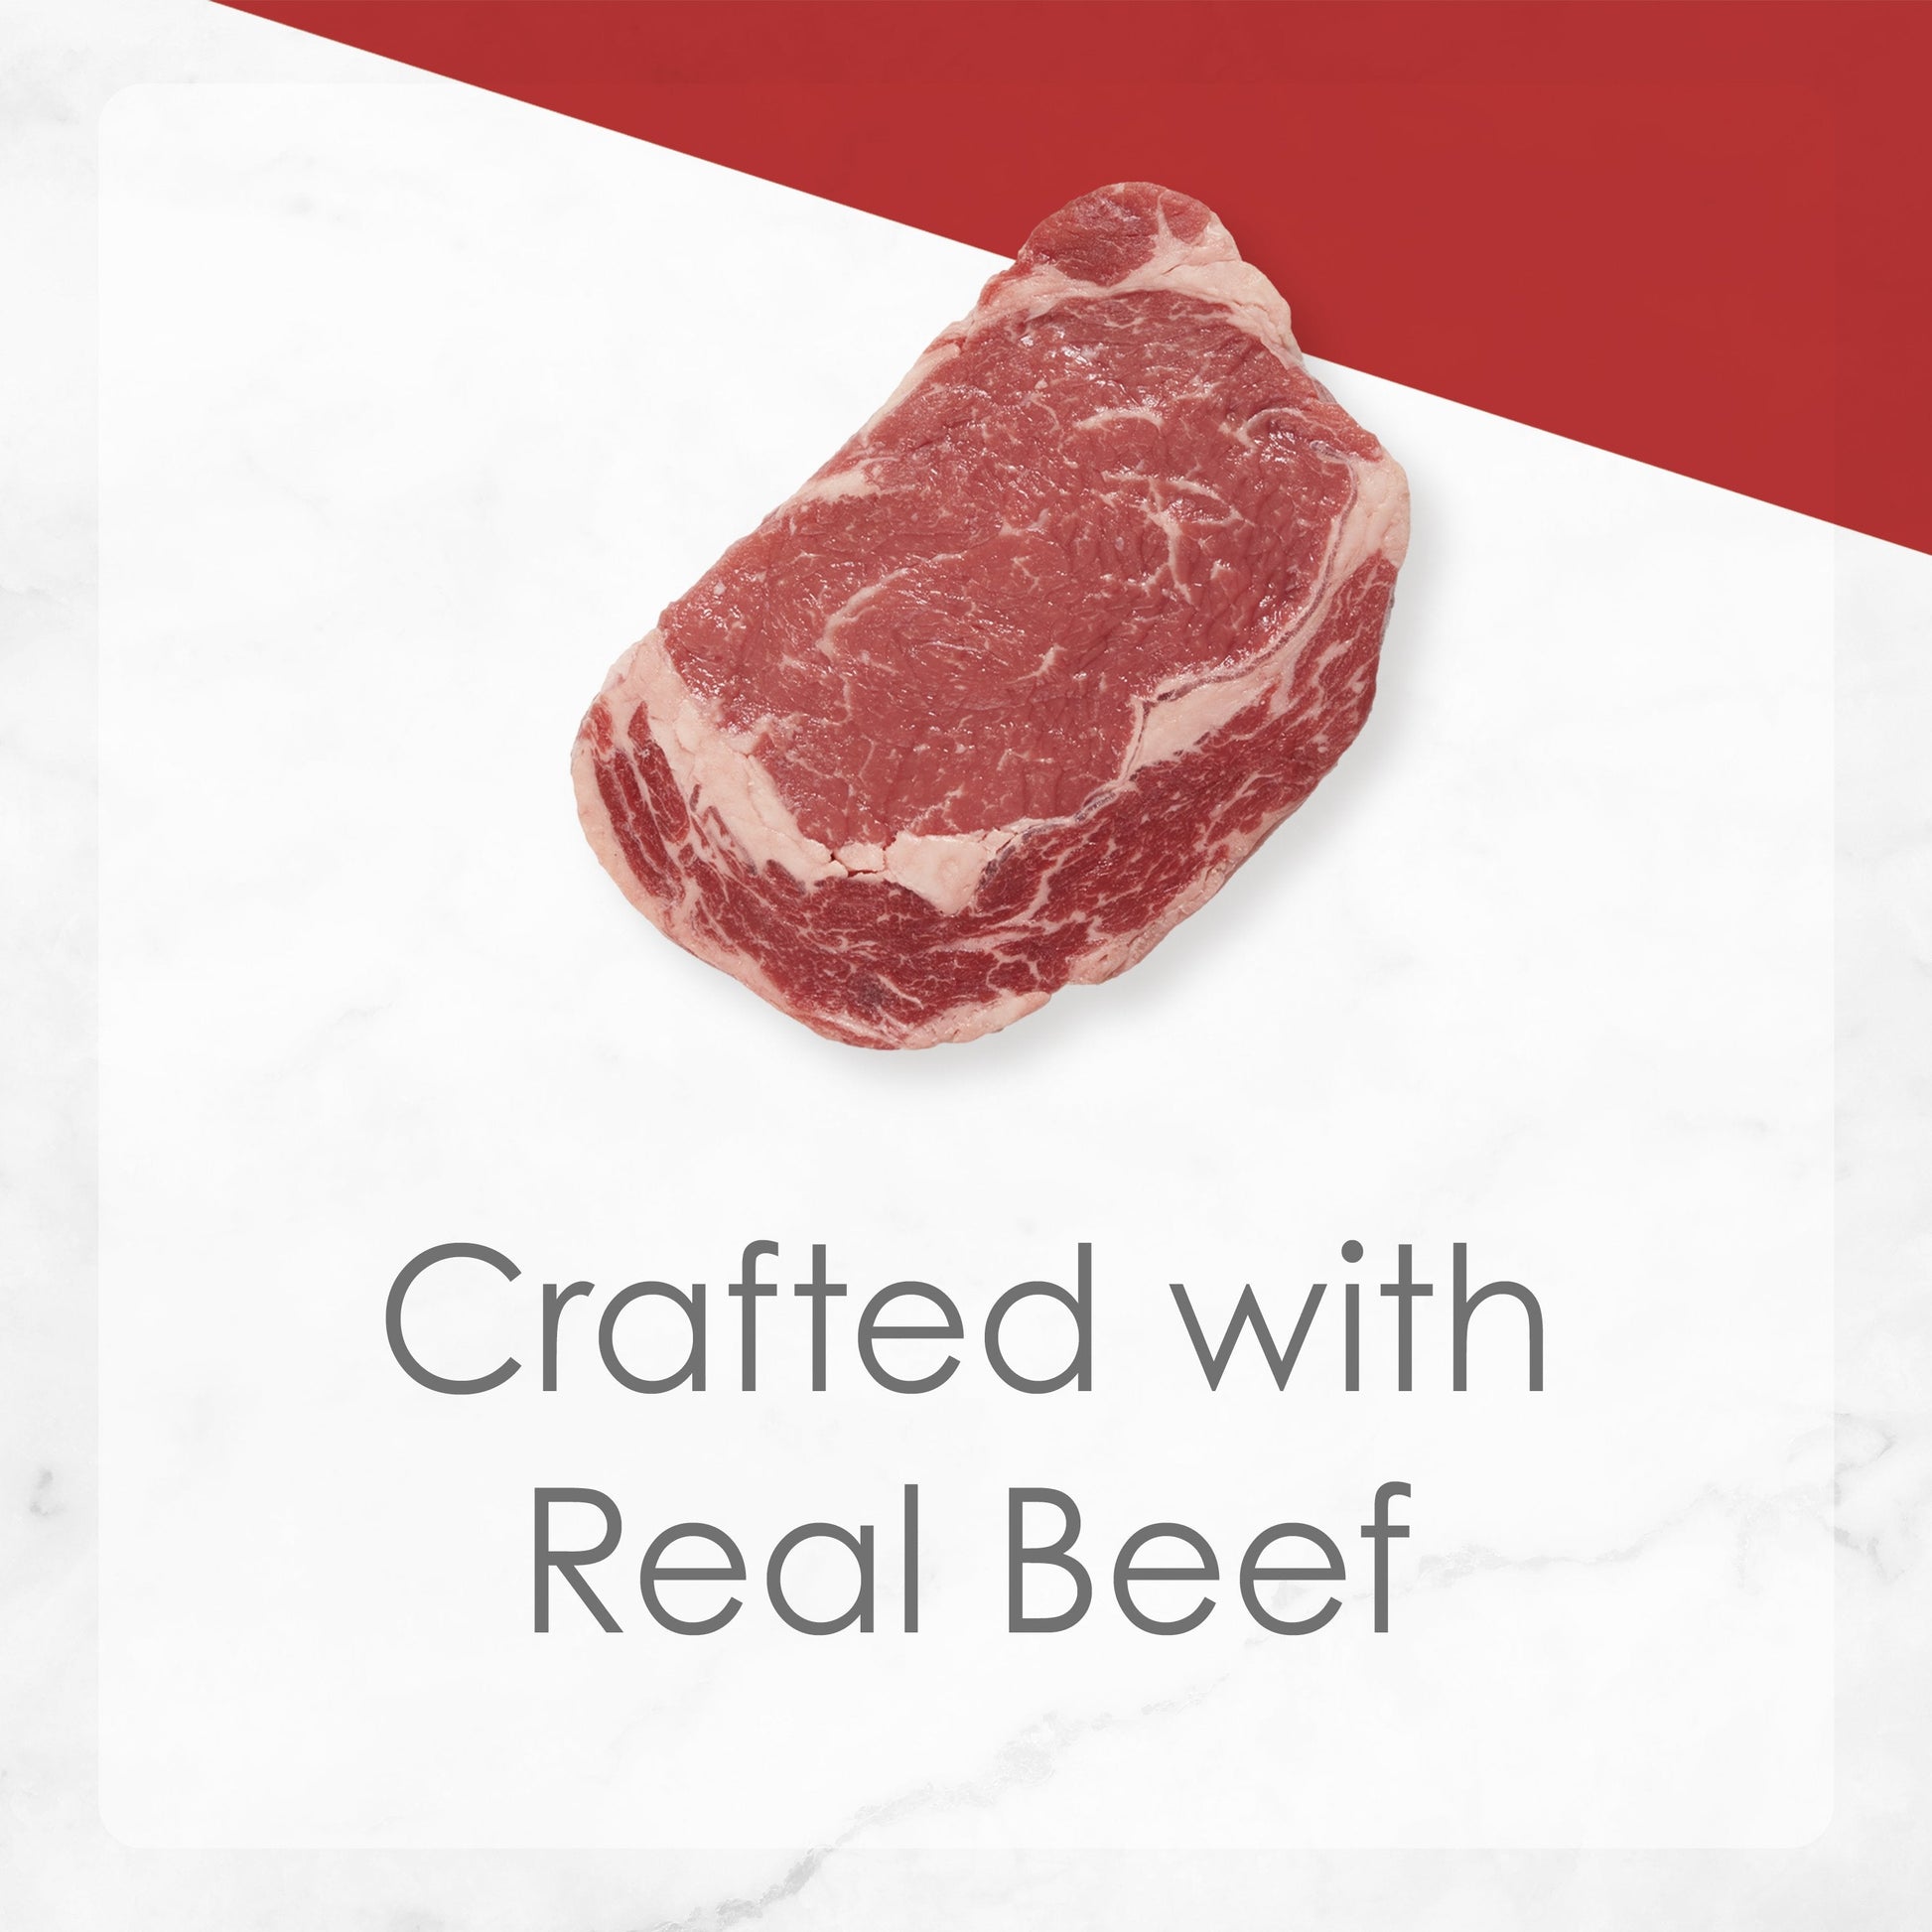 Crafted with real beef